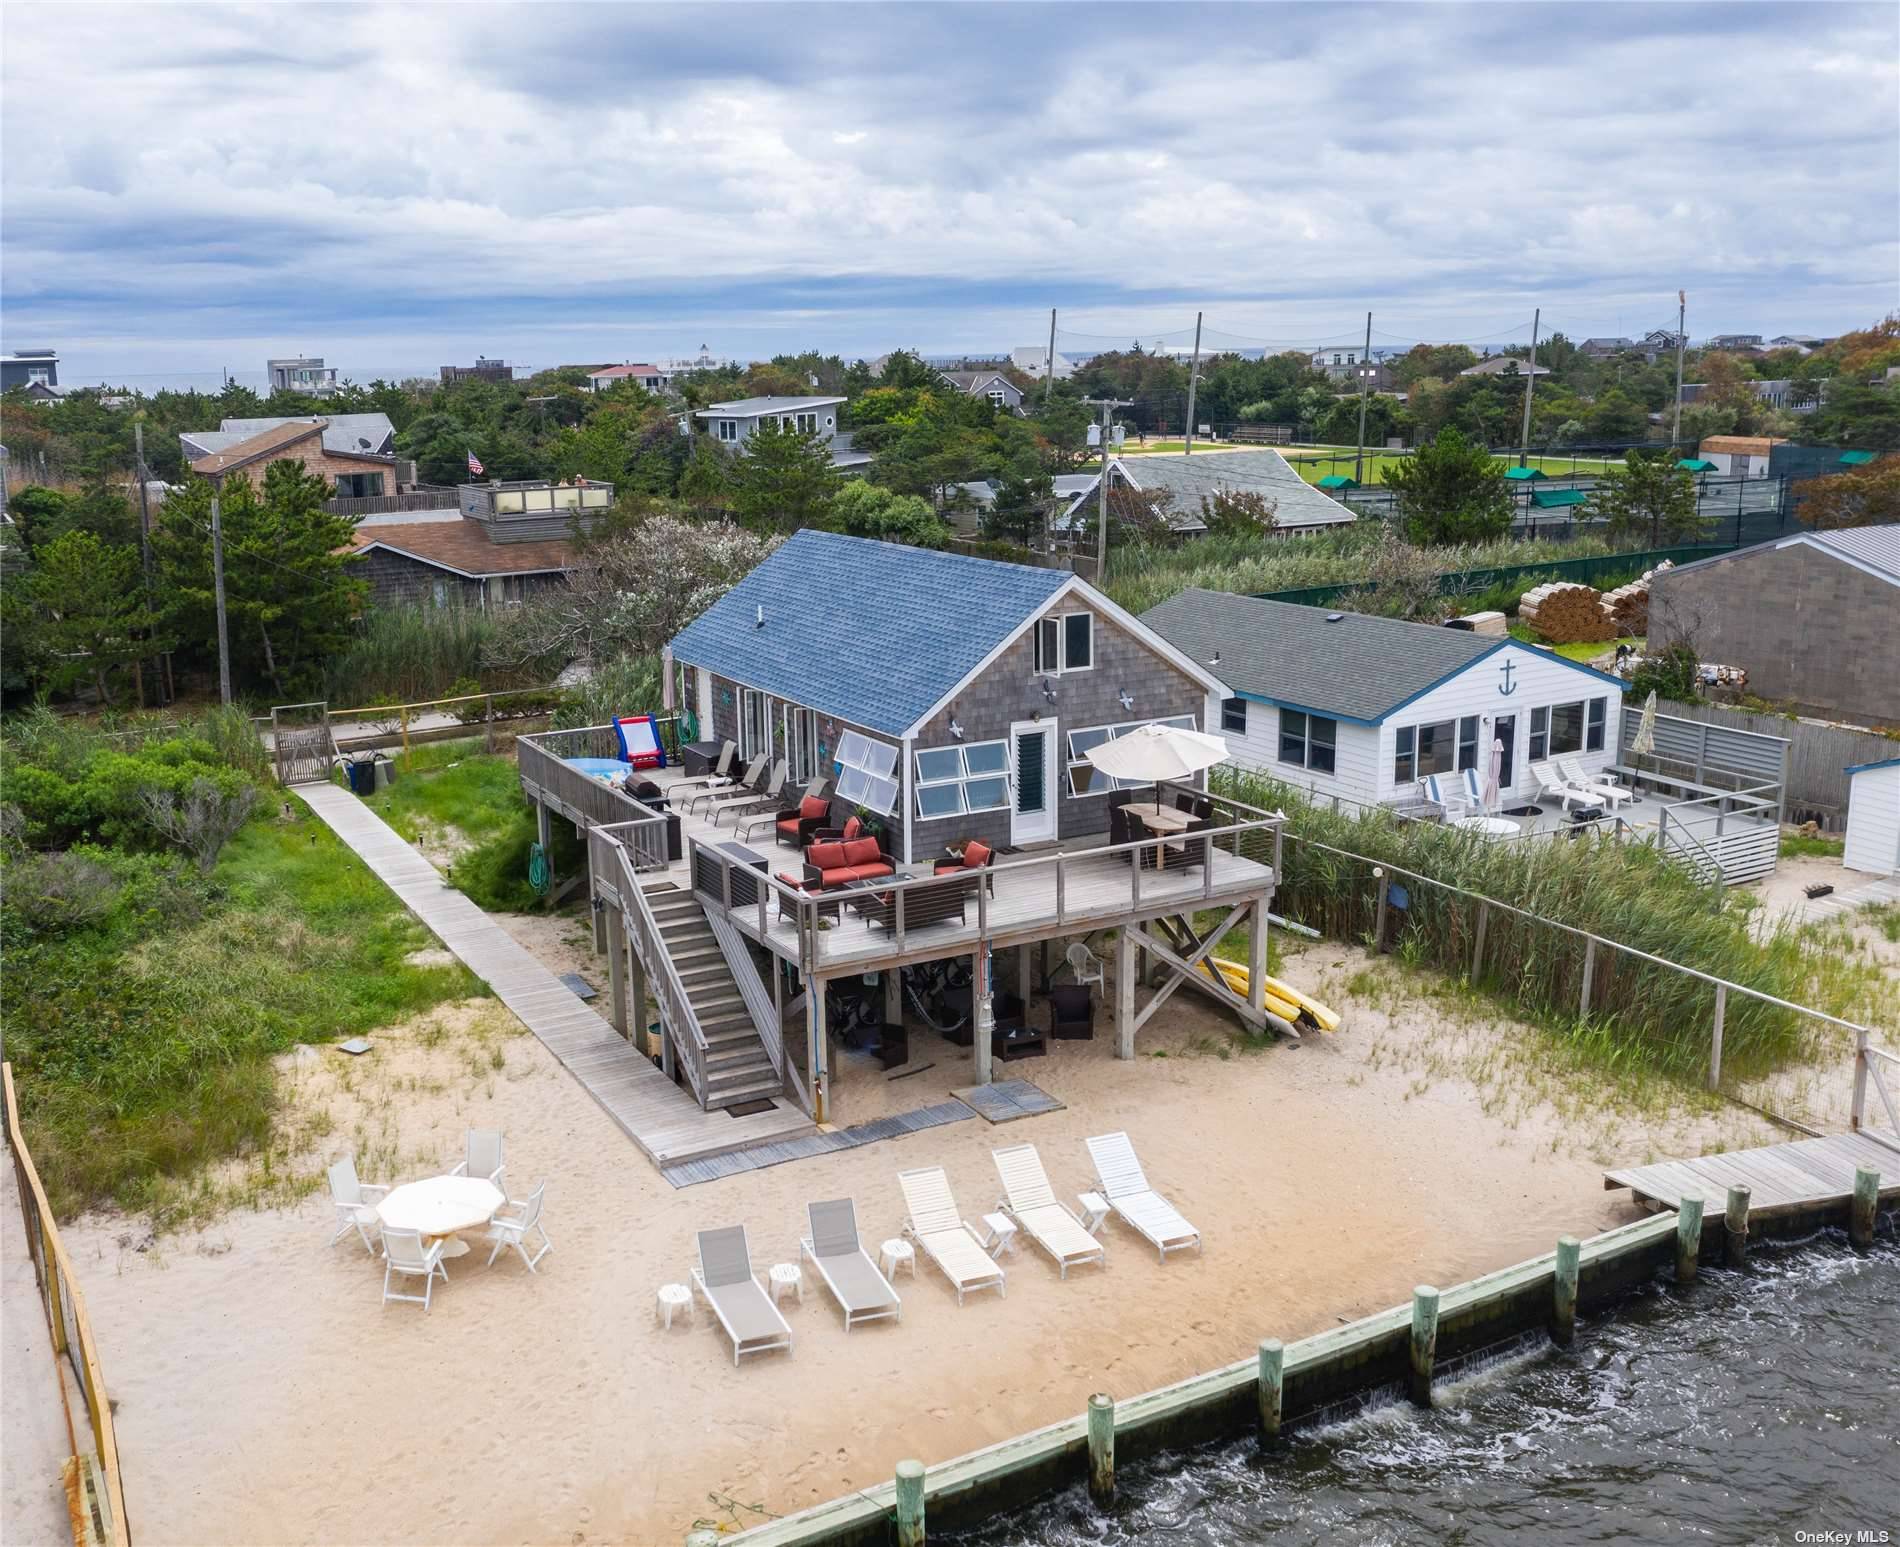 Bay Front Living amp ; Spectacular Sunsets from the Deck of this Bayfront Beach House.